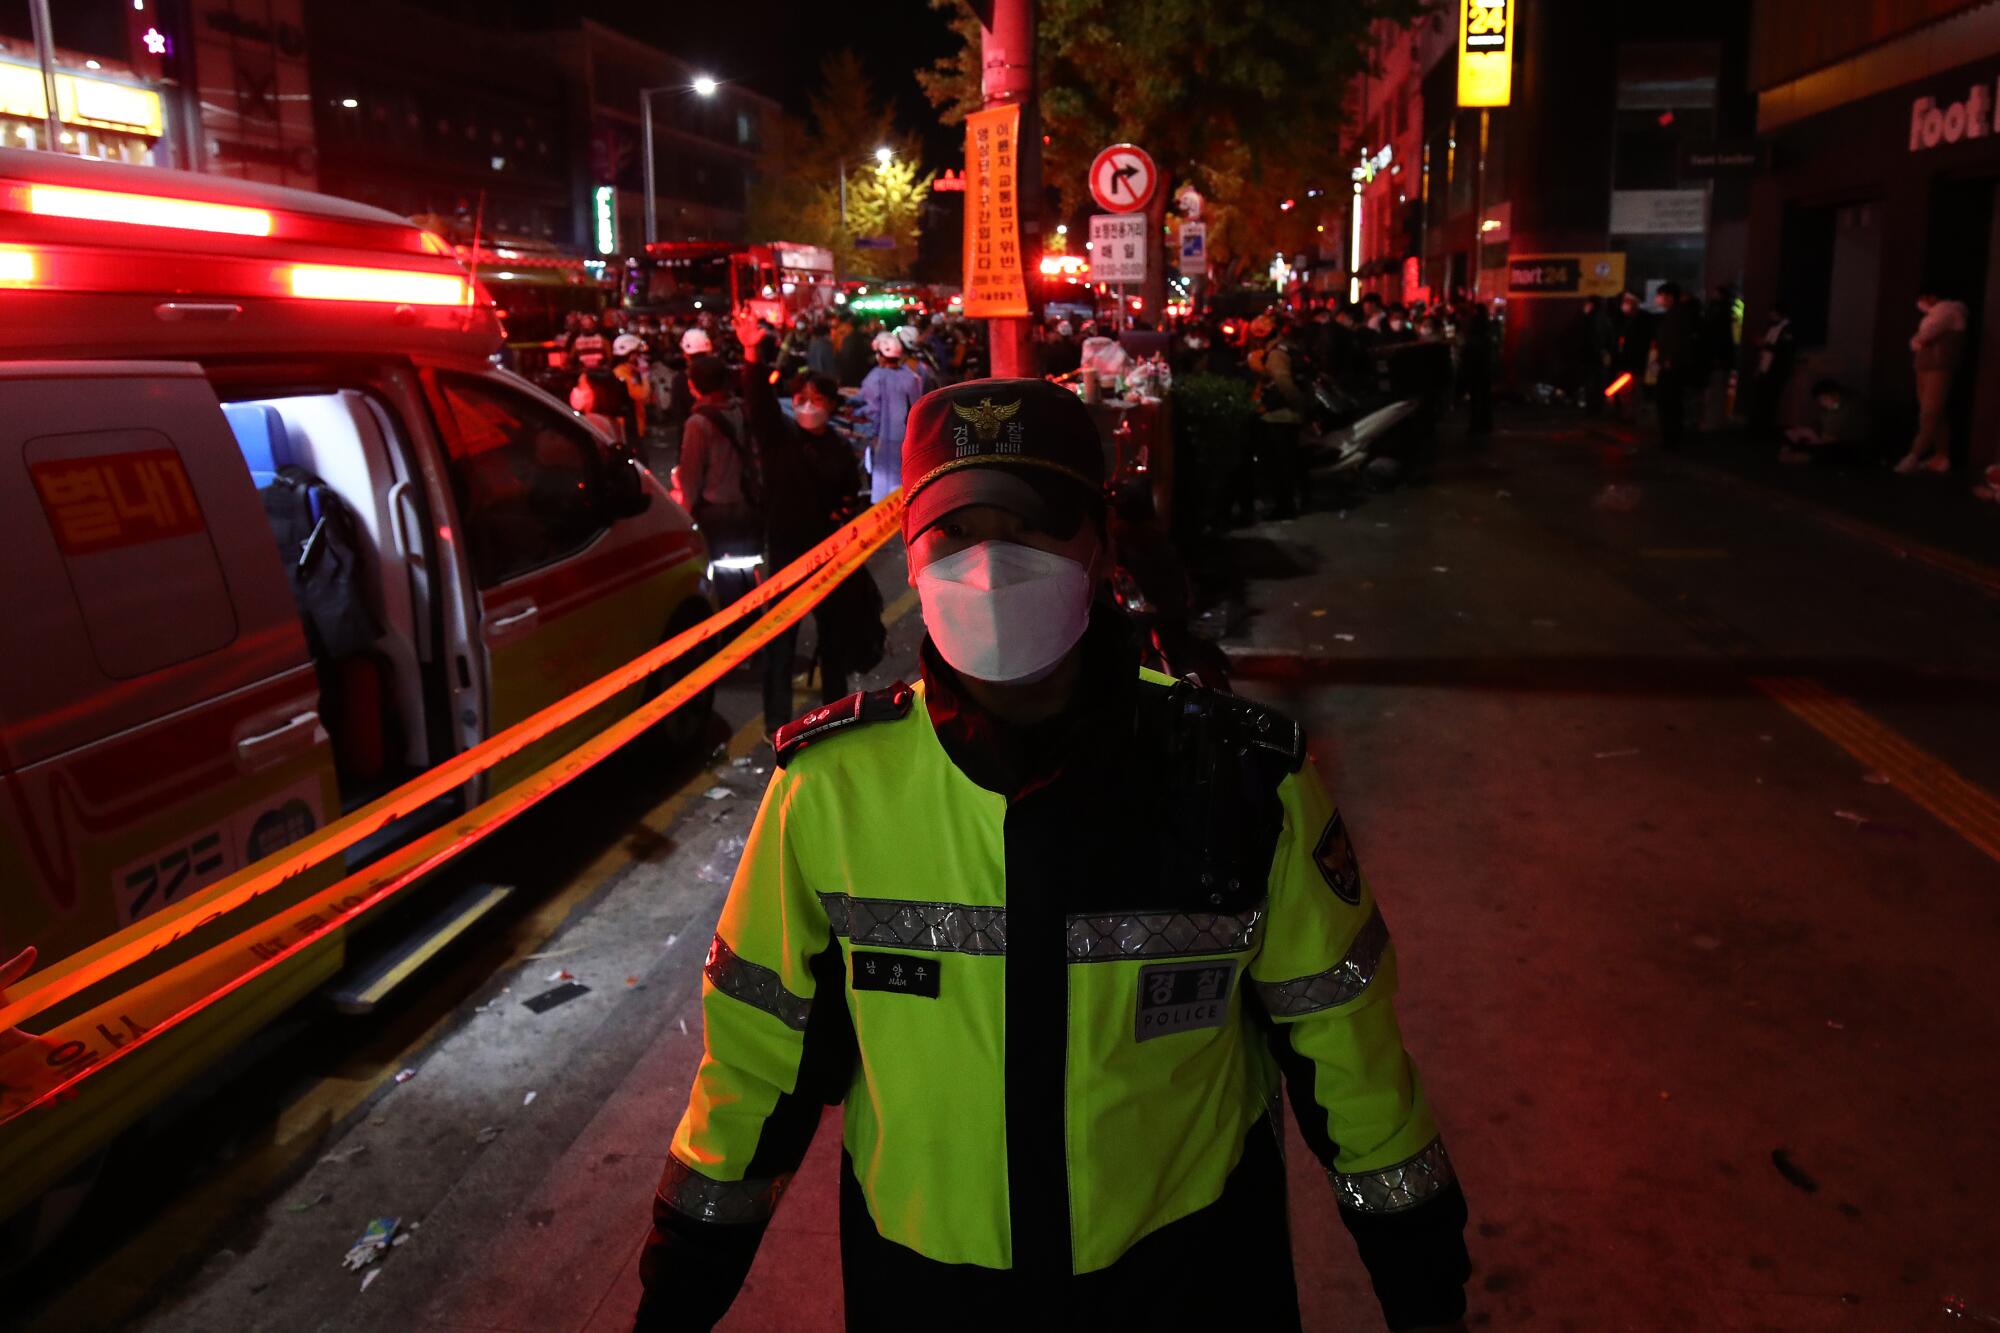 A police officer in a yellow-green vest is surrounded by the red glow of lights on a crowded street with emergency vehicles